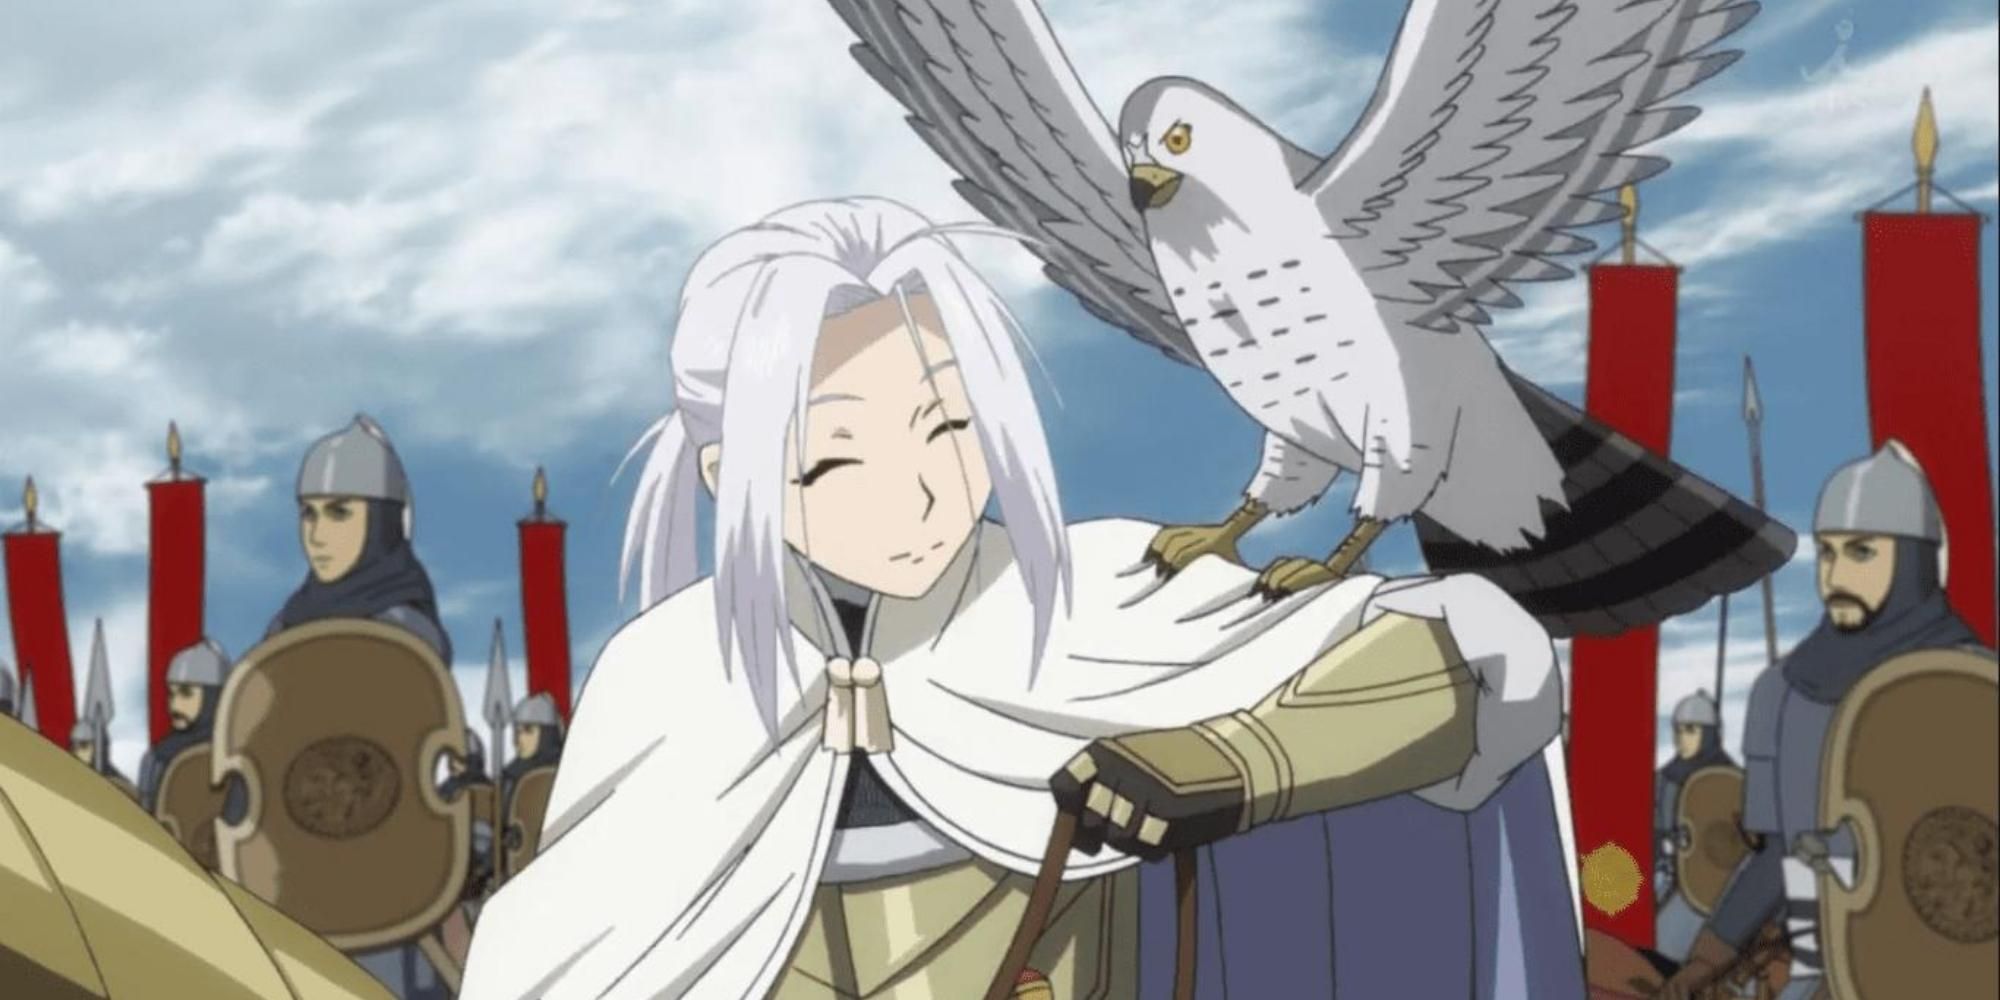 Arslan with is bird and soldiers in The Heroic Legend of Arslan